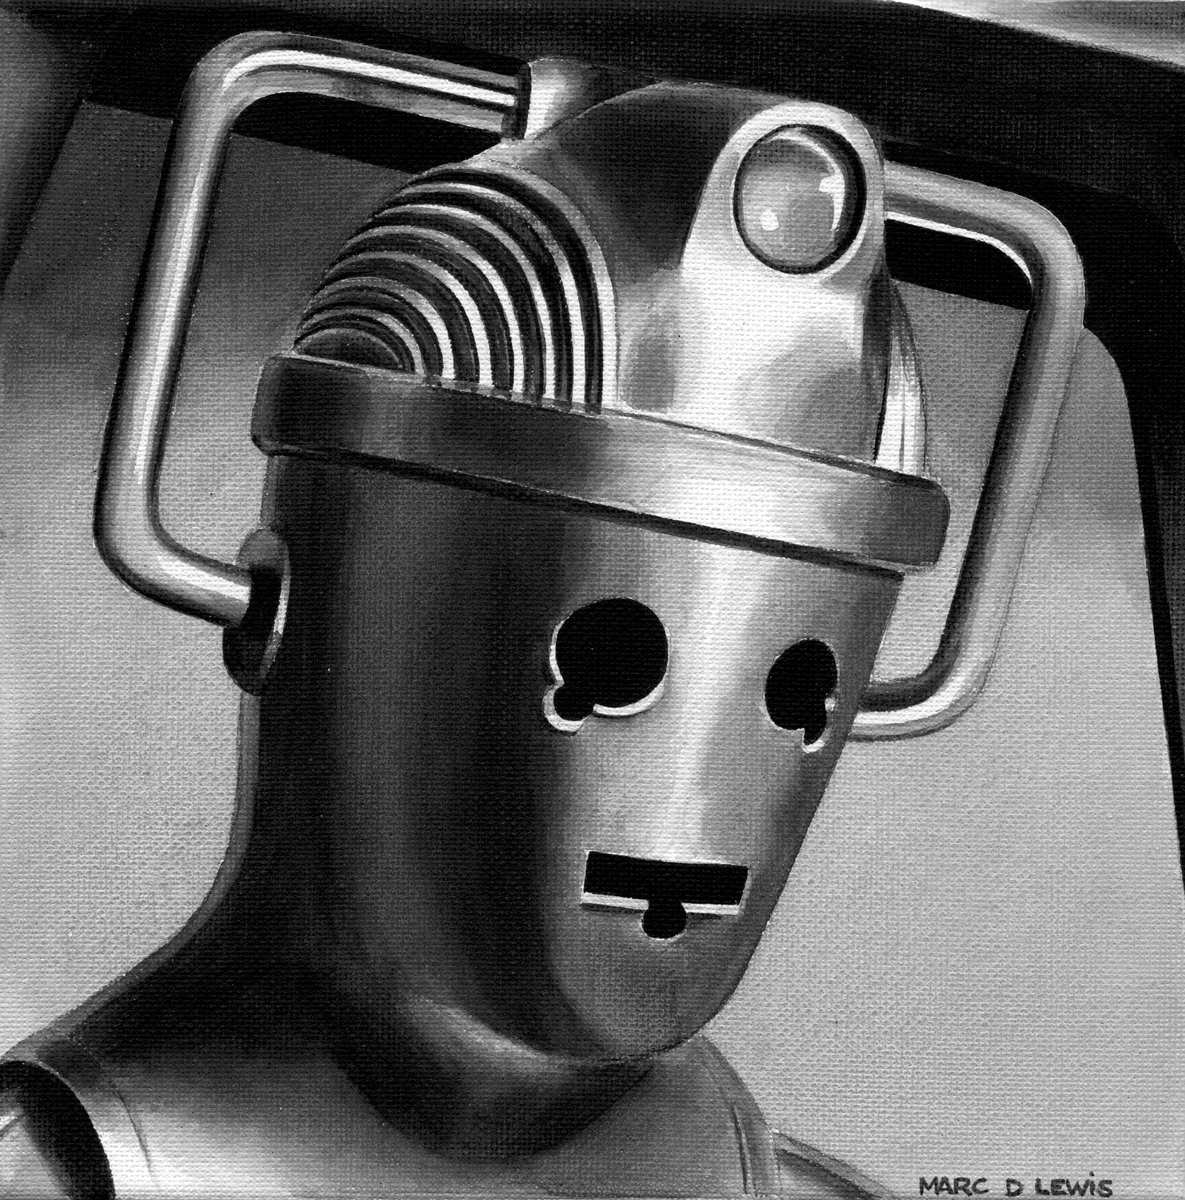 'You know our ways. You must be destroyed.' 🤖 (Acrylic on canvas, 20x20cm) #DoctorWho #DrWho #DWfanart #Cybermen #CanvasArt #TraditionalArt #painting #illustration #art